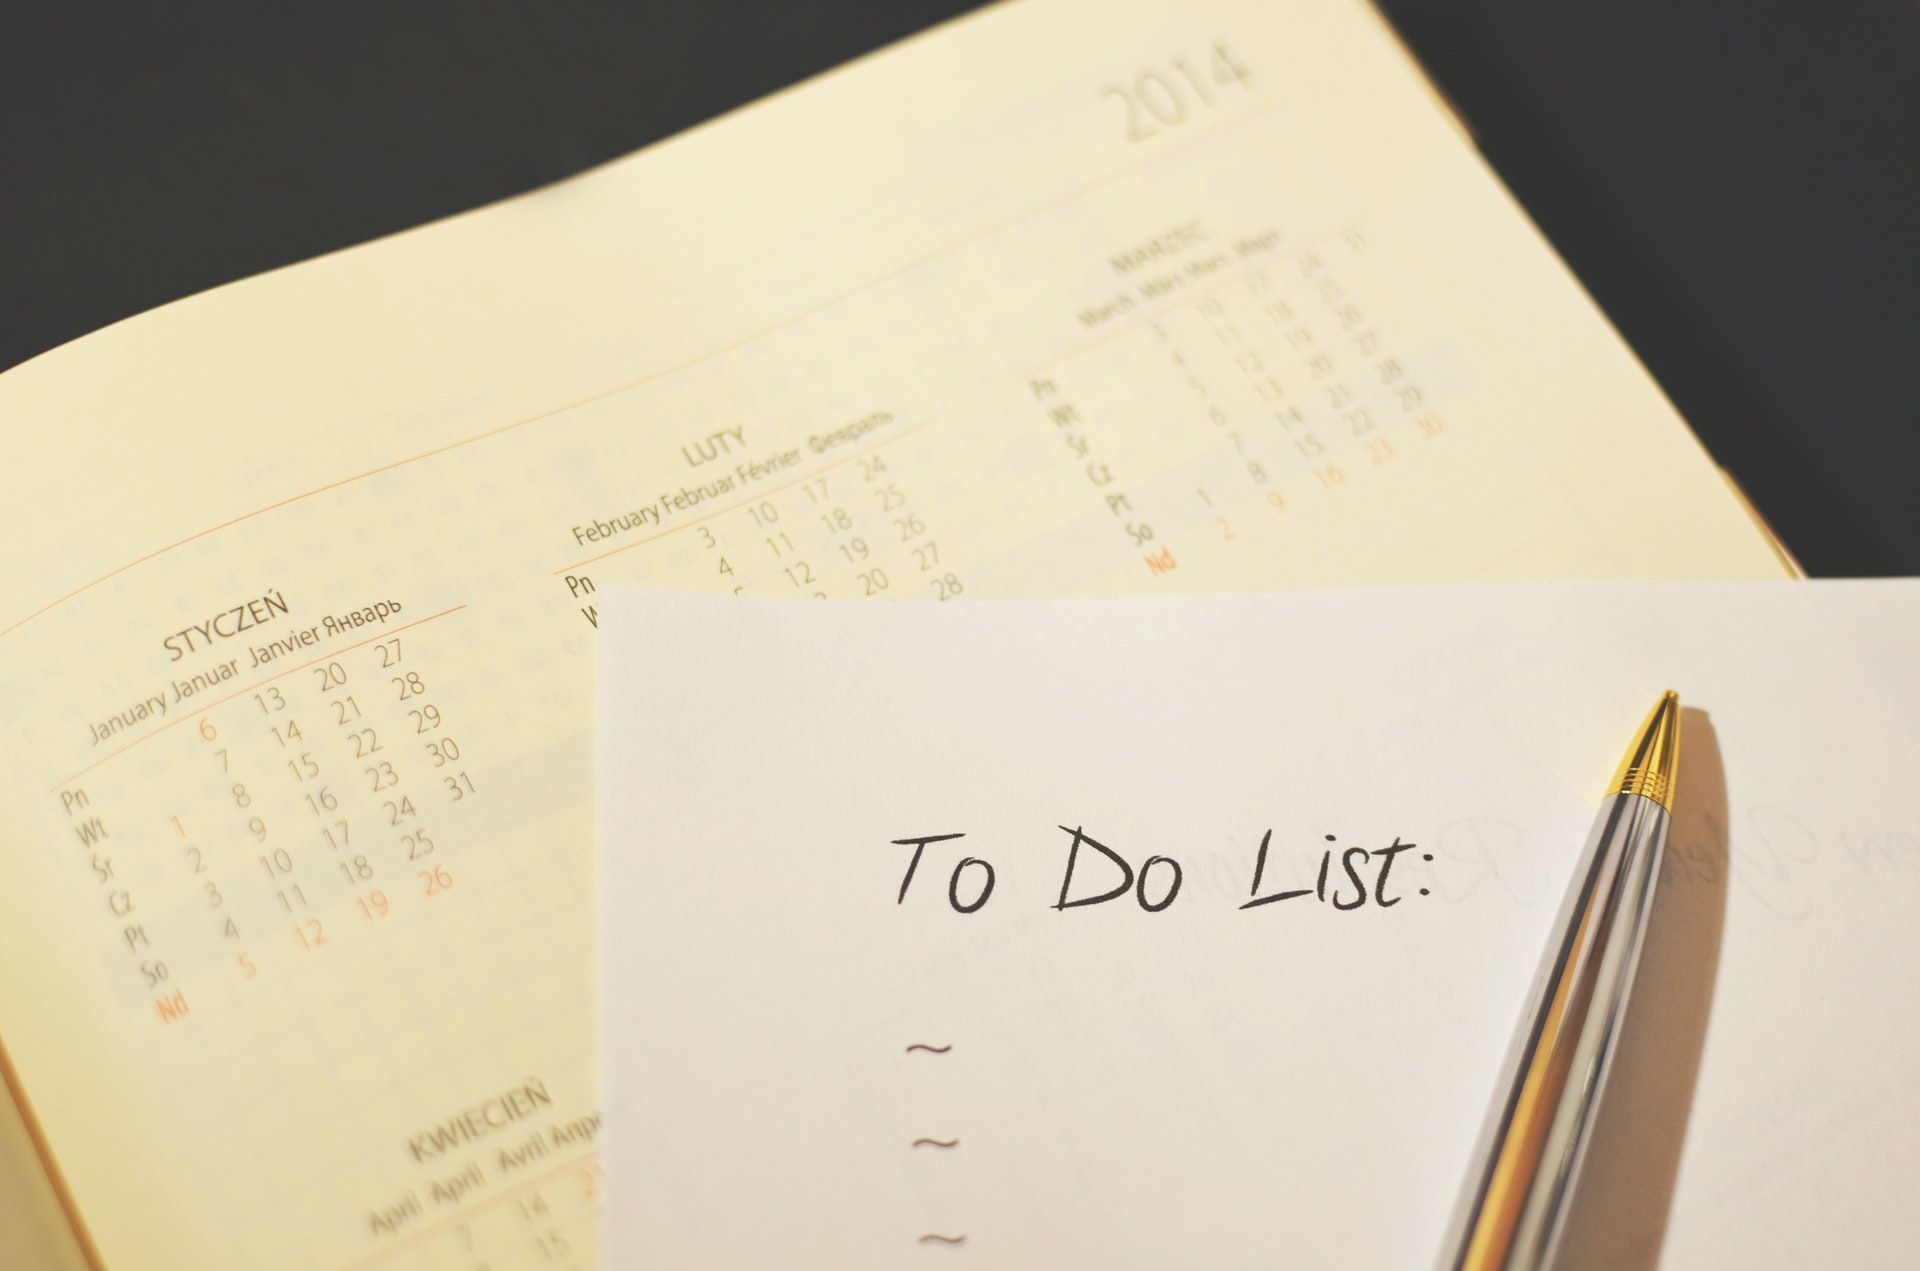 To do list on paper, how to prepare for the WSET exam